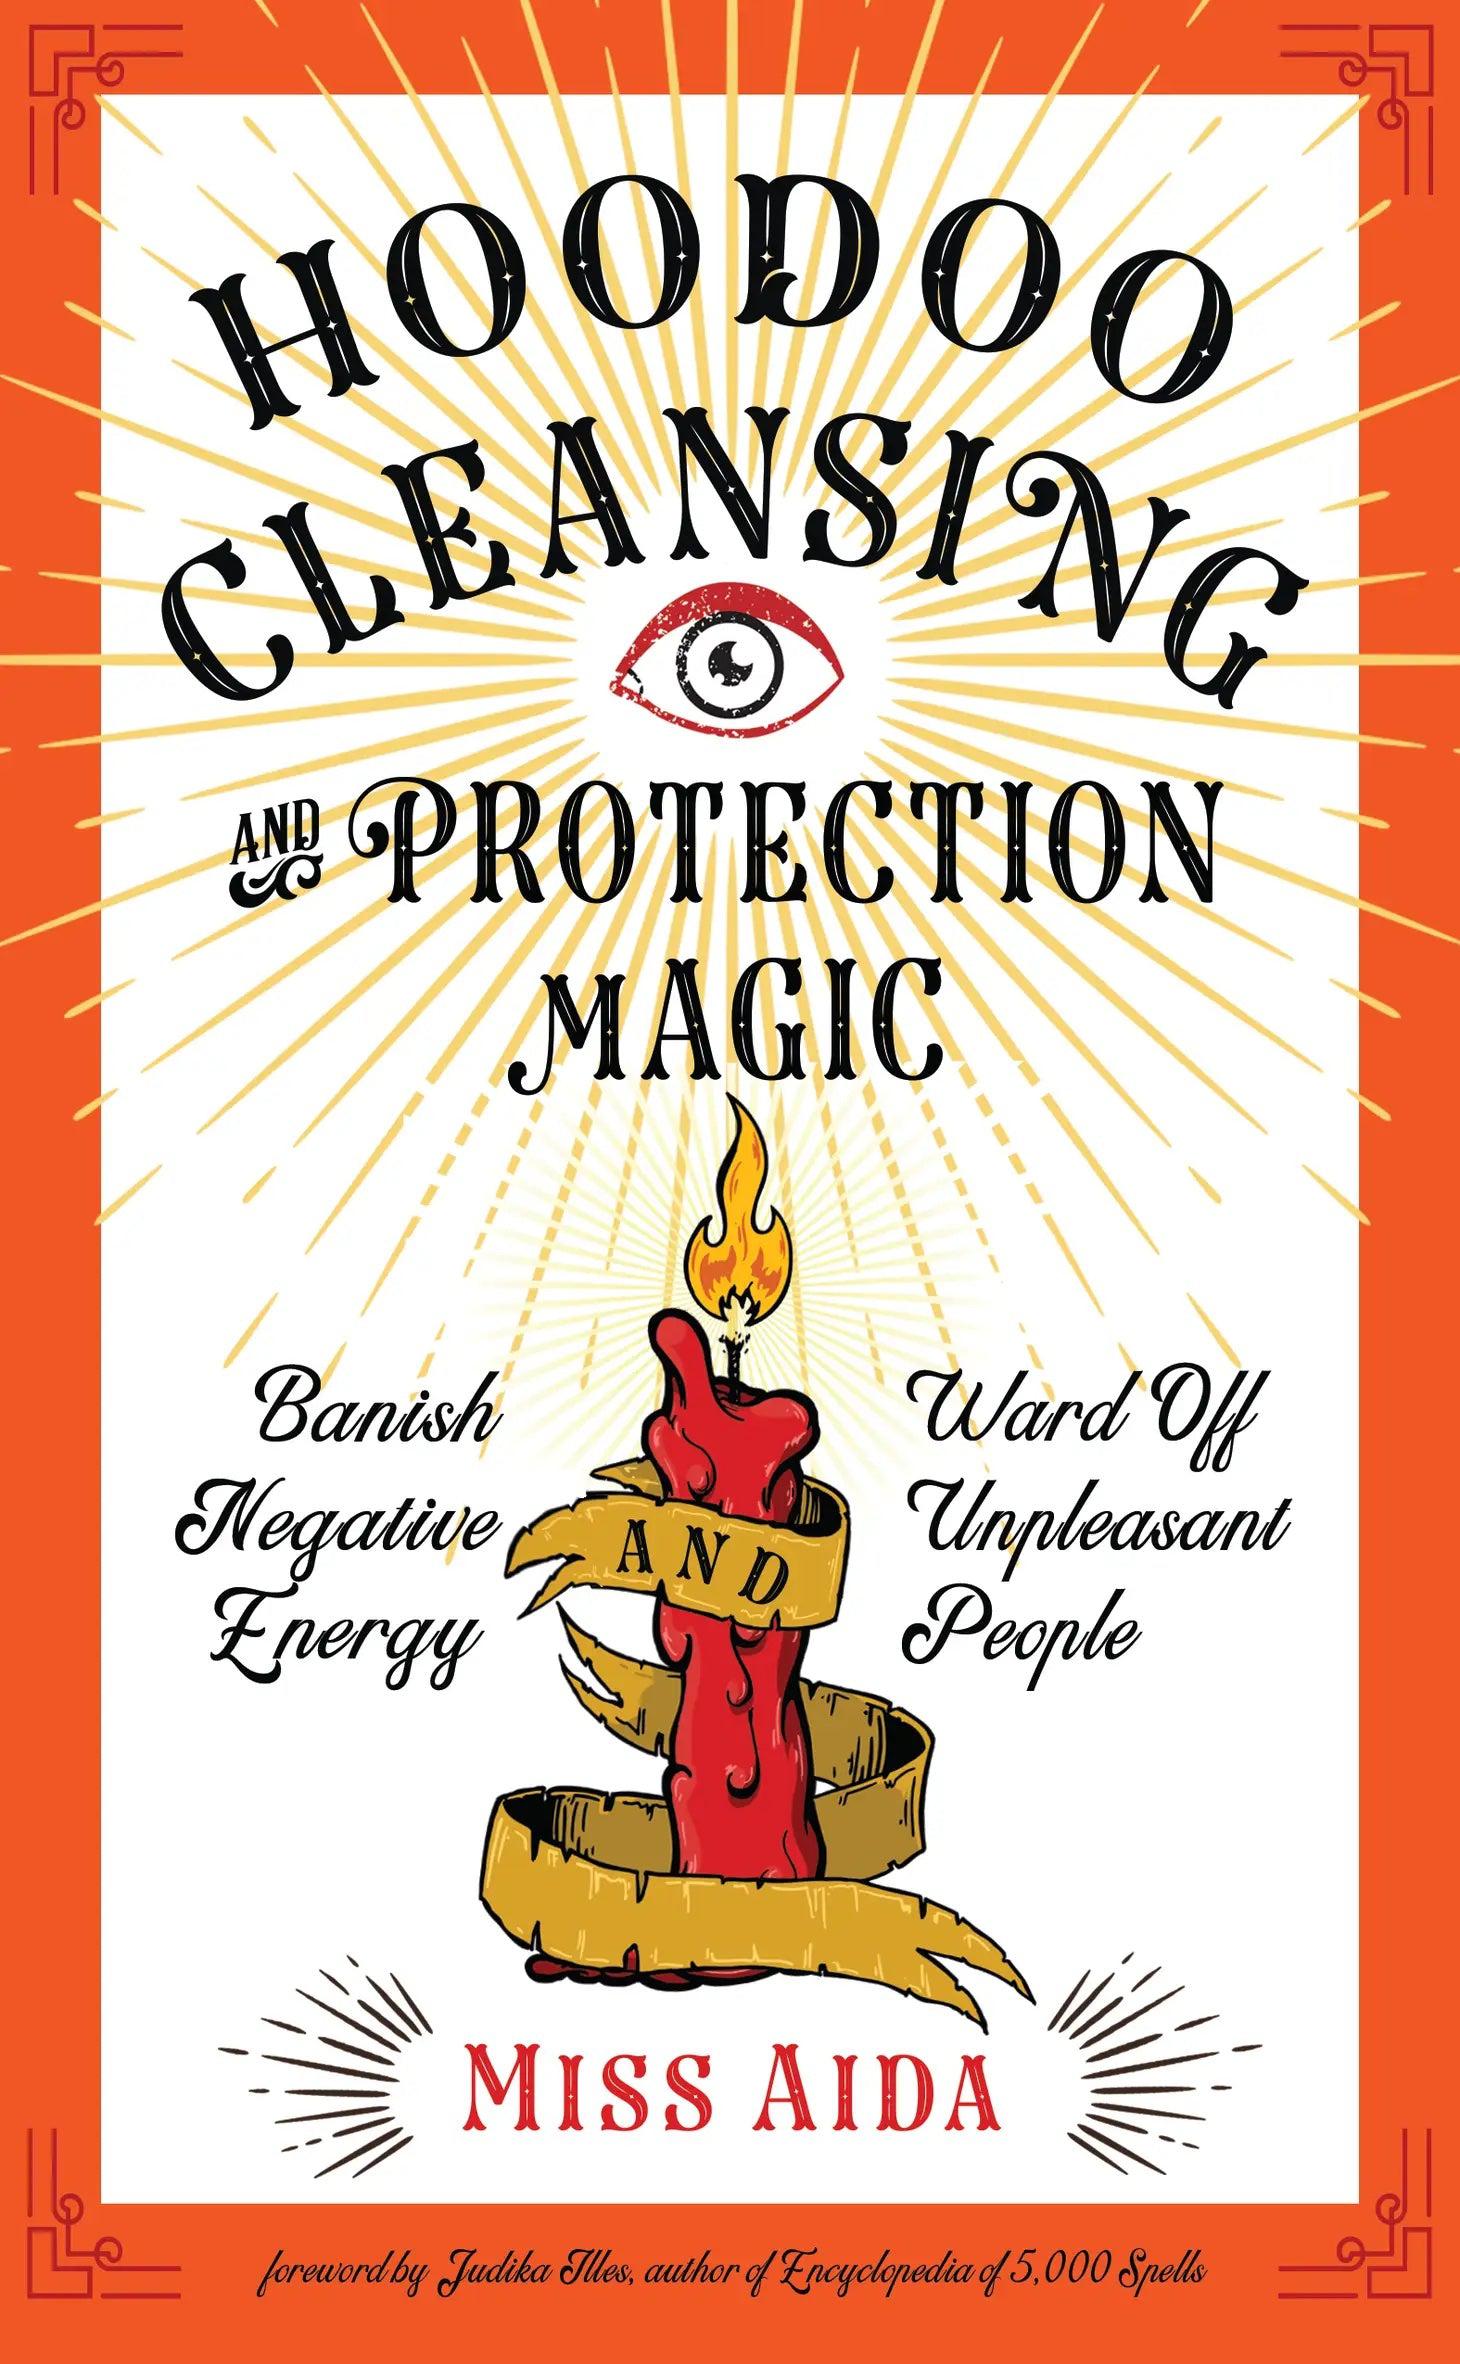 Hoodoo Cleansing and Protection Magic : Banish Negative Energy and Ward Off Unpleasant People